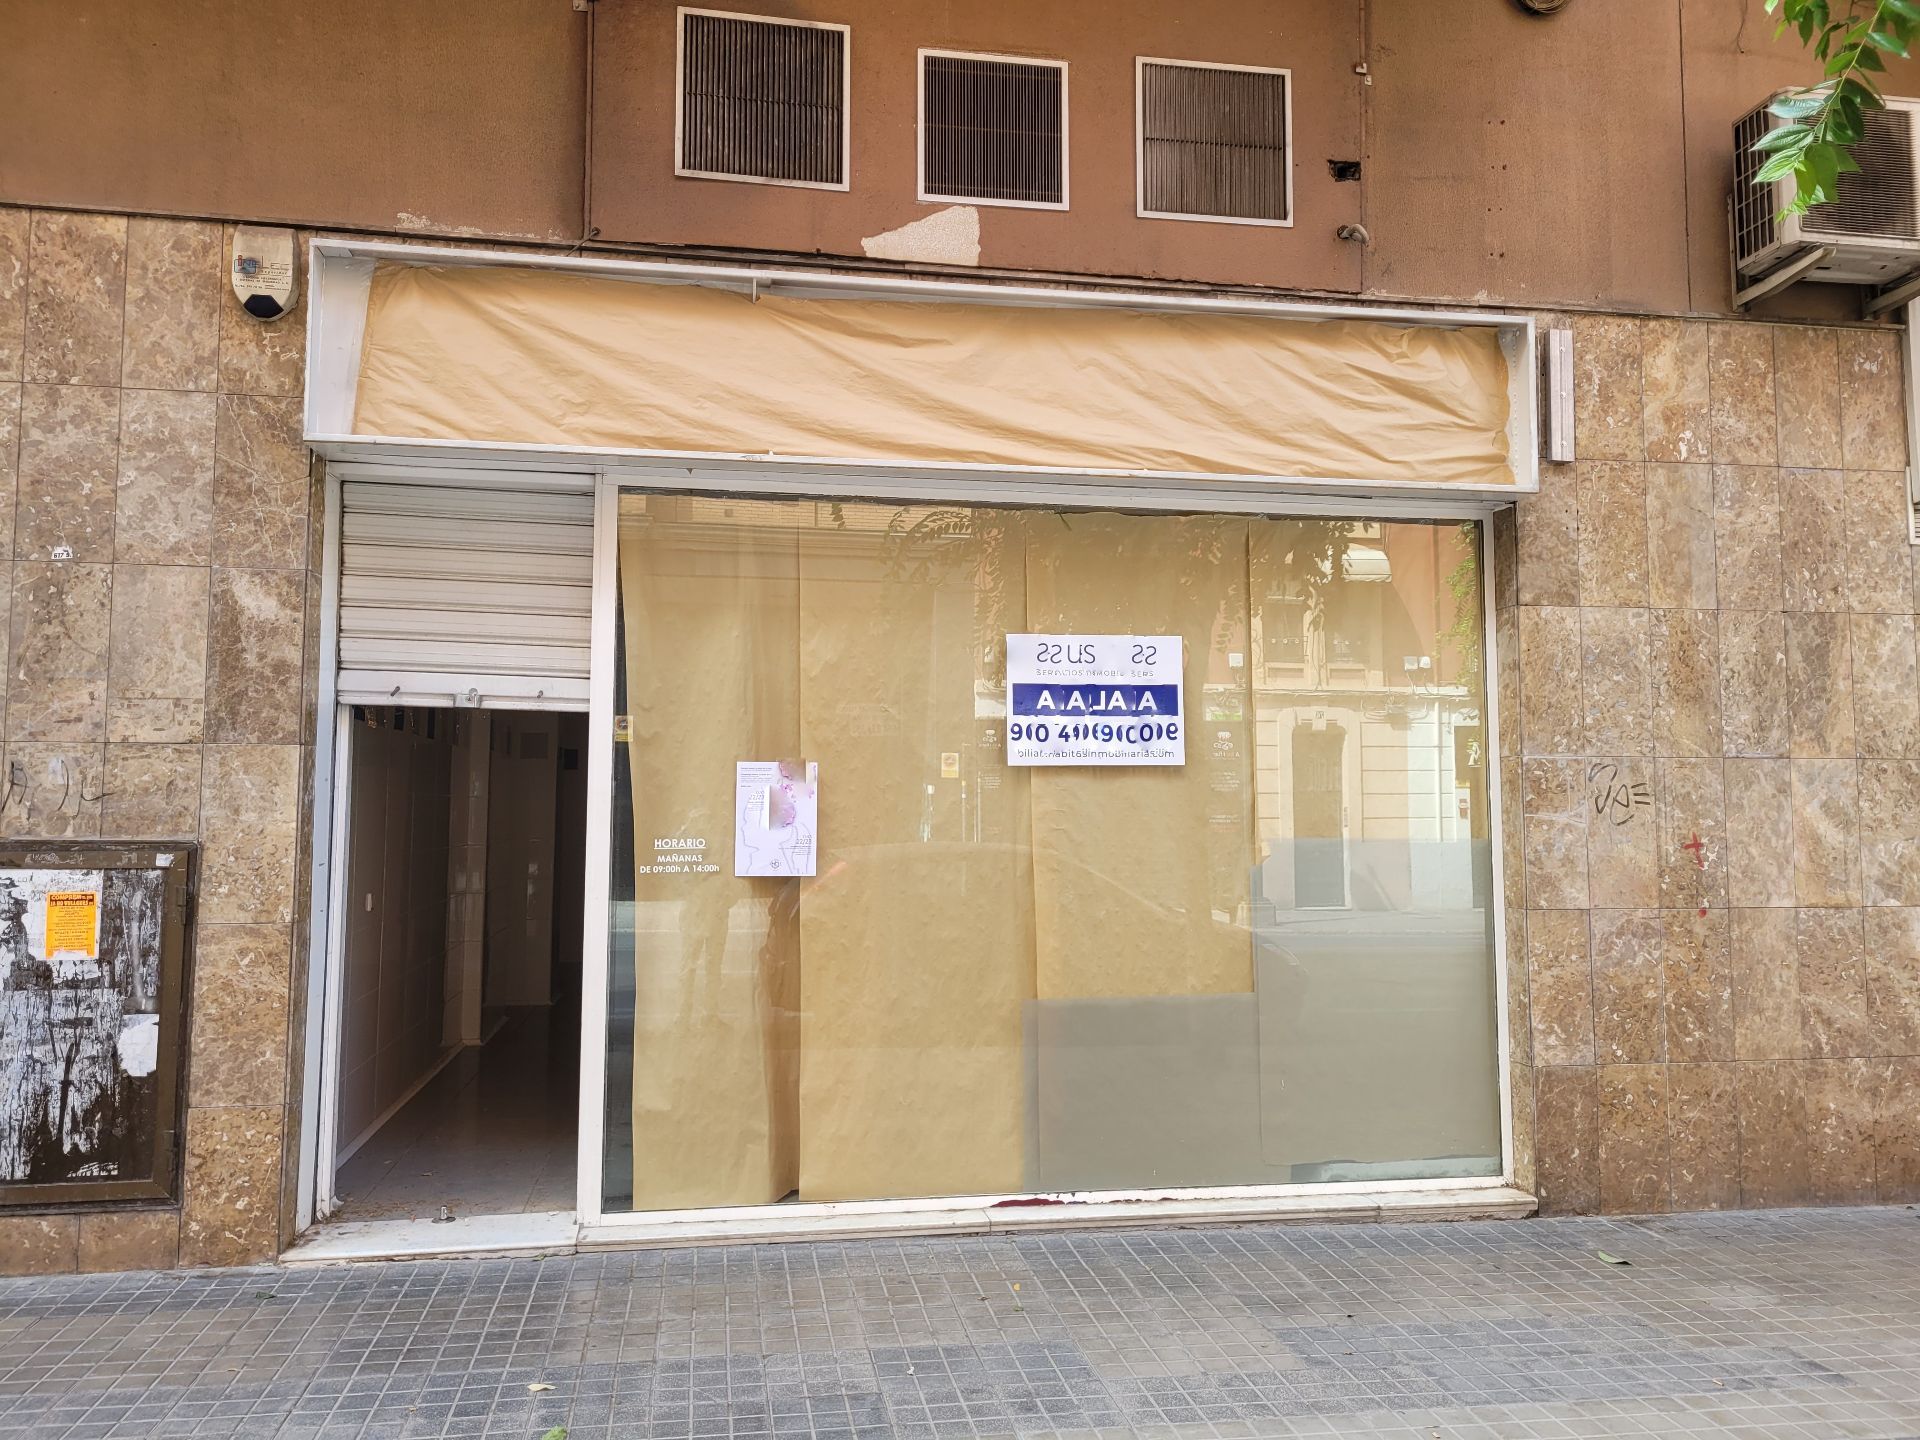 Commercial property in Alcoy, ENSANCHE, for rent